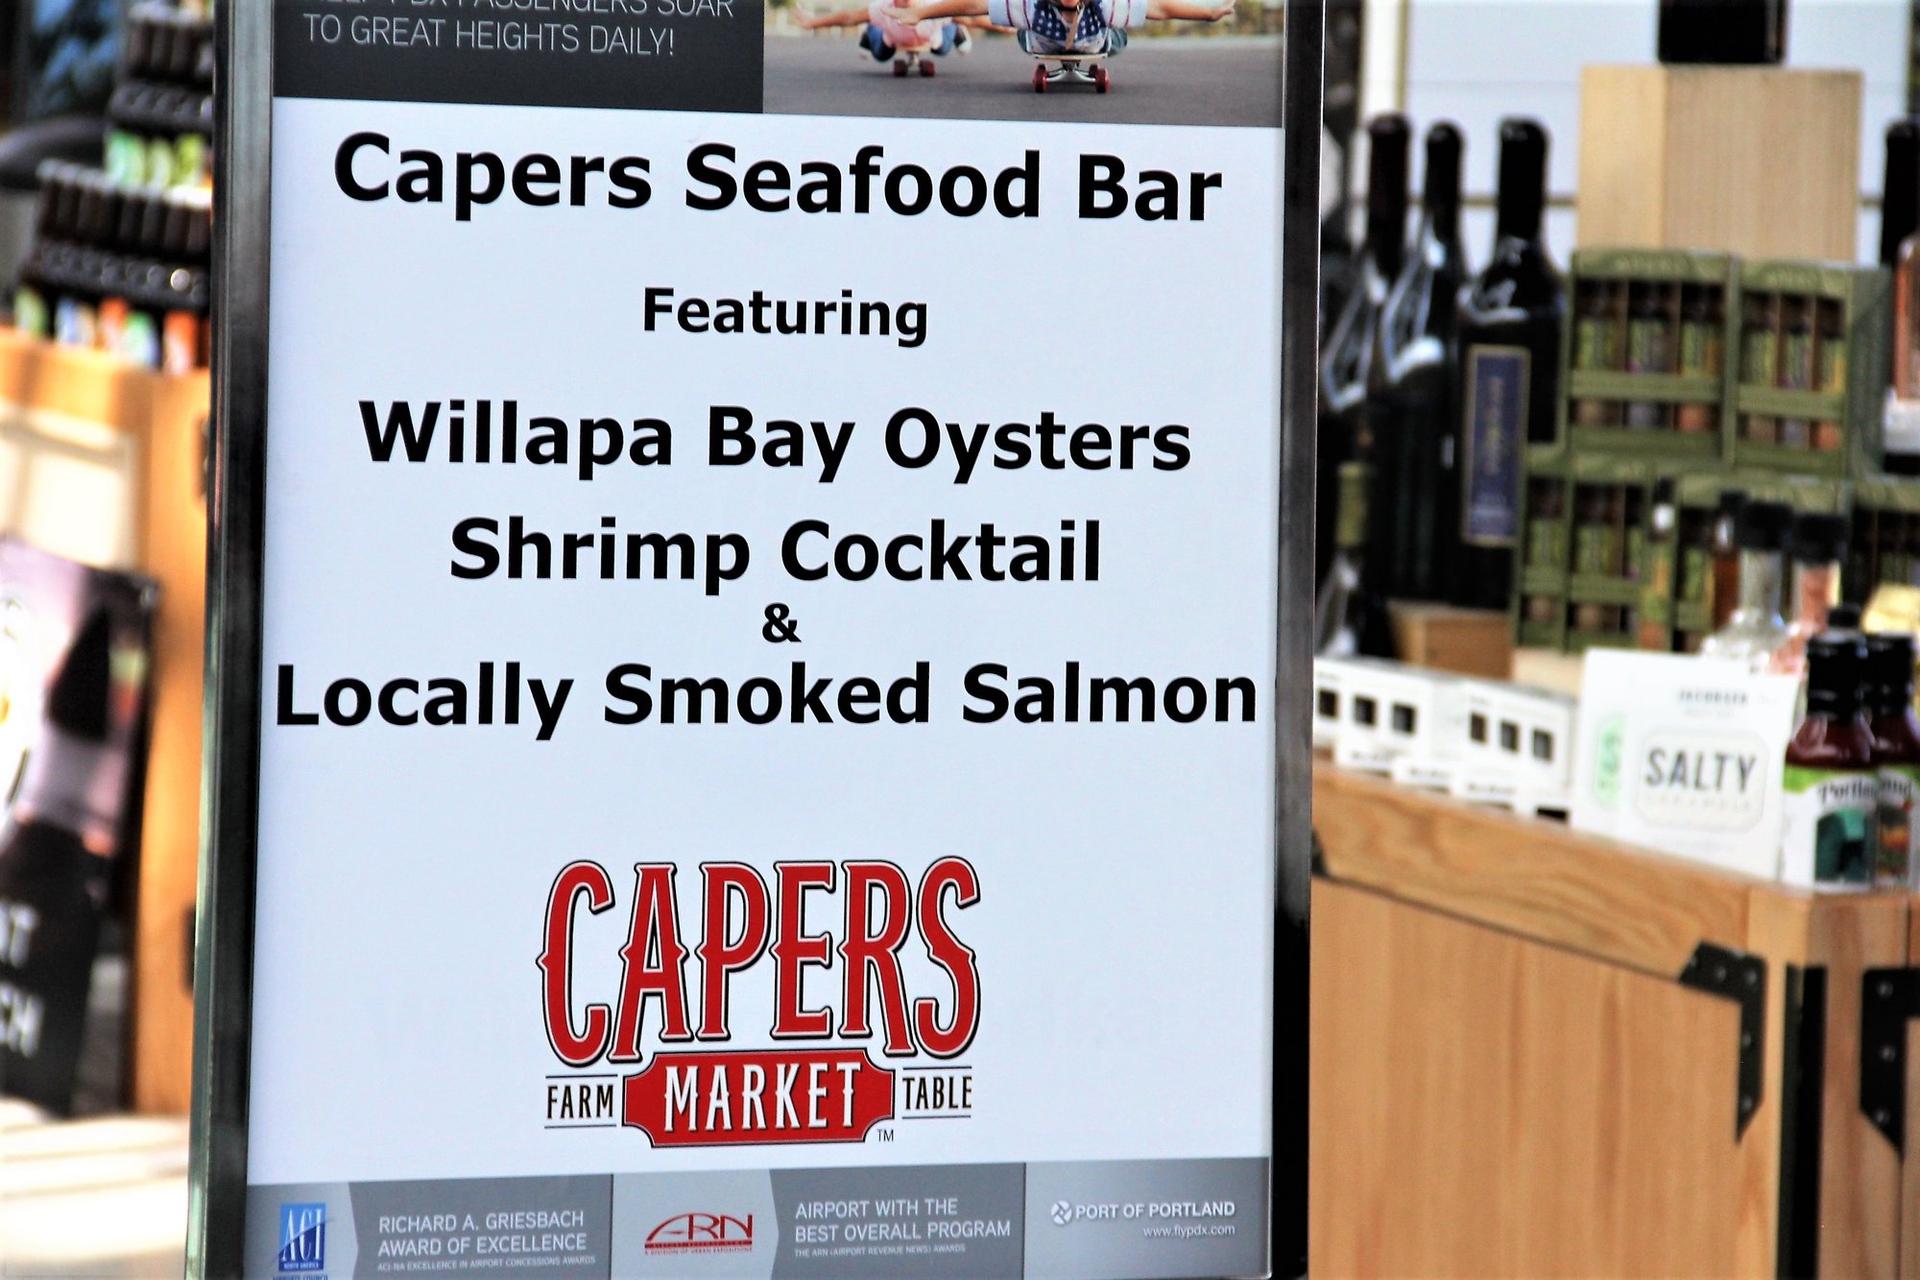 Capers Market image 36 of 46